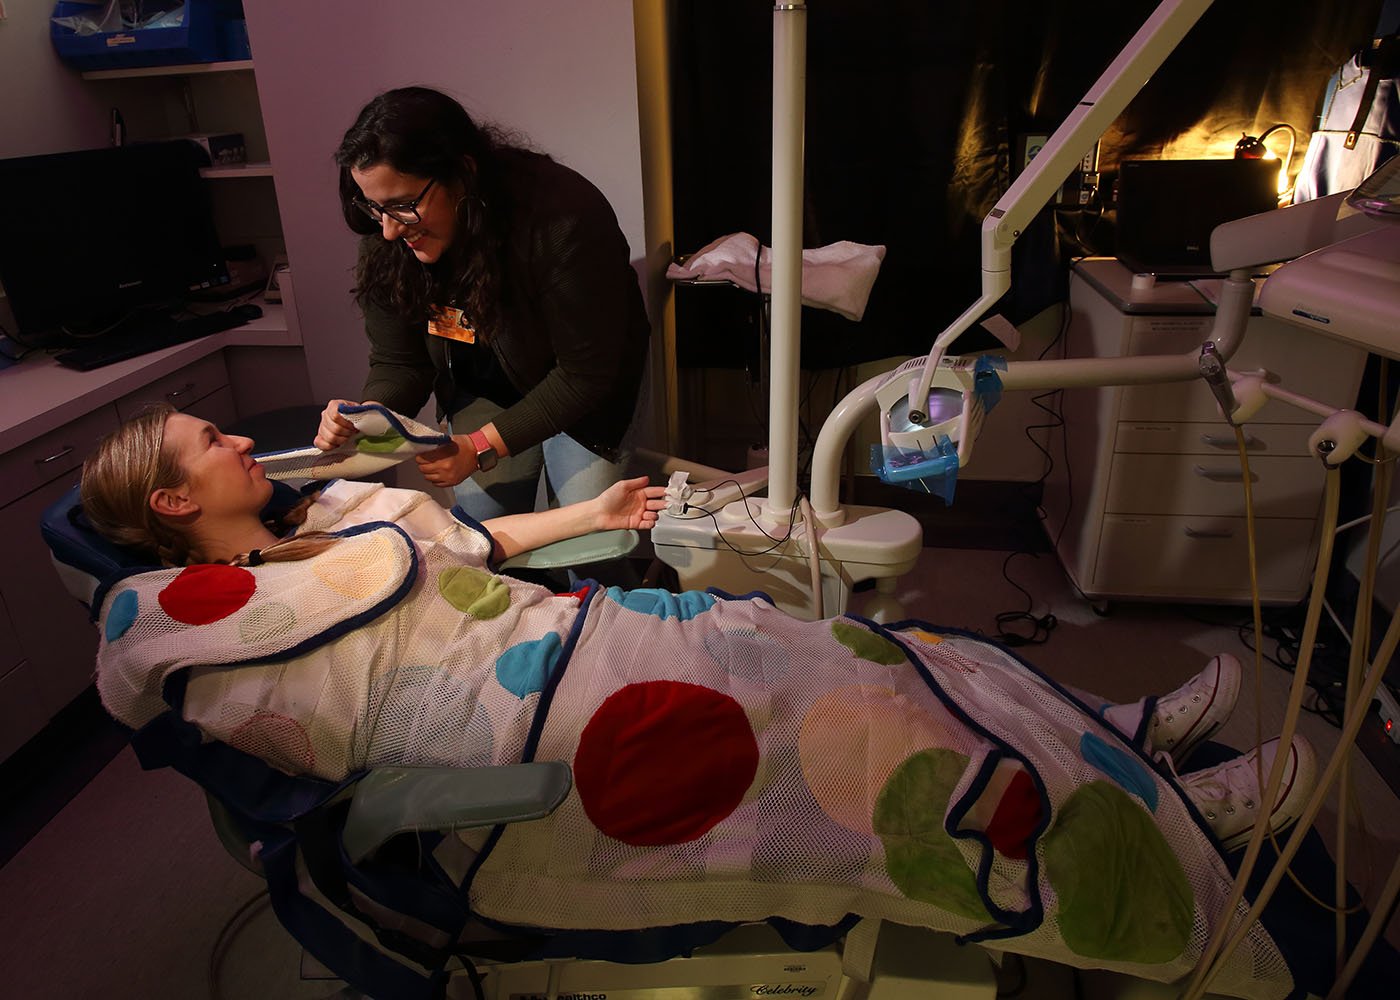 Photograph of a young person reclined in a dental operatory chair while a researcher secures a mesh style wrap around the chair.